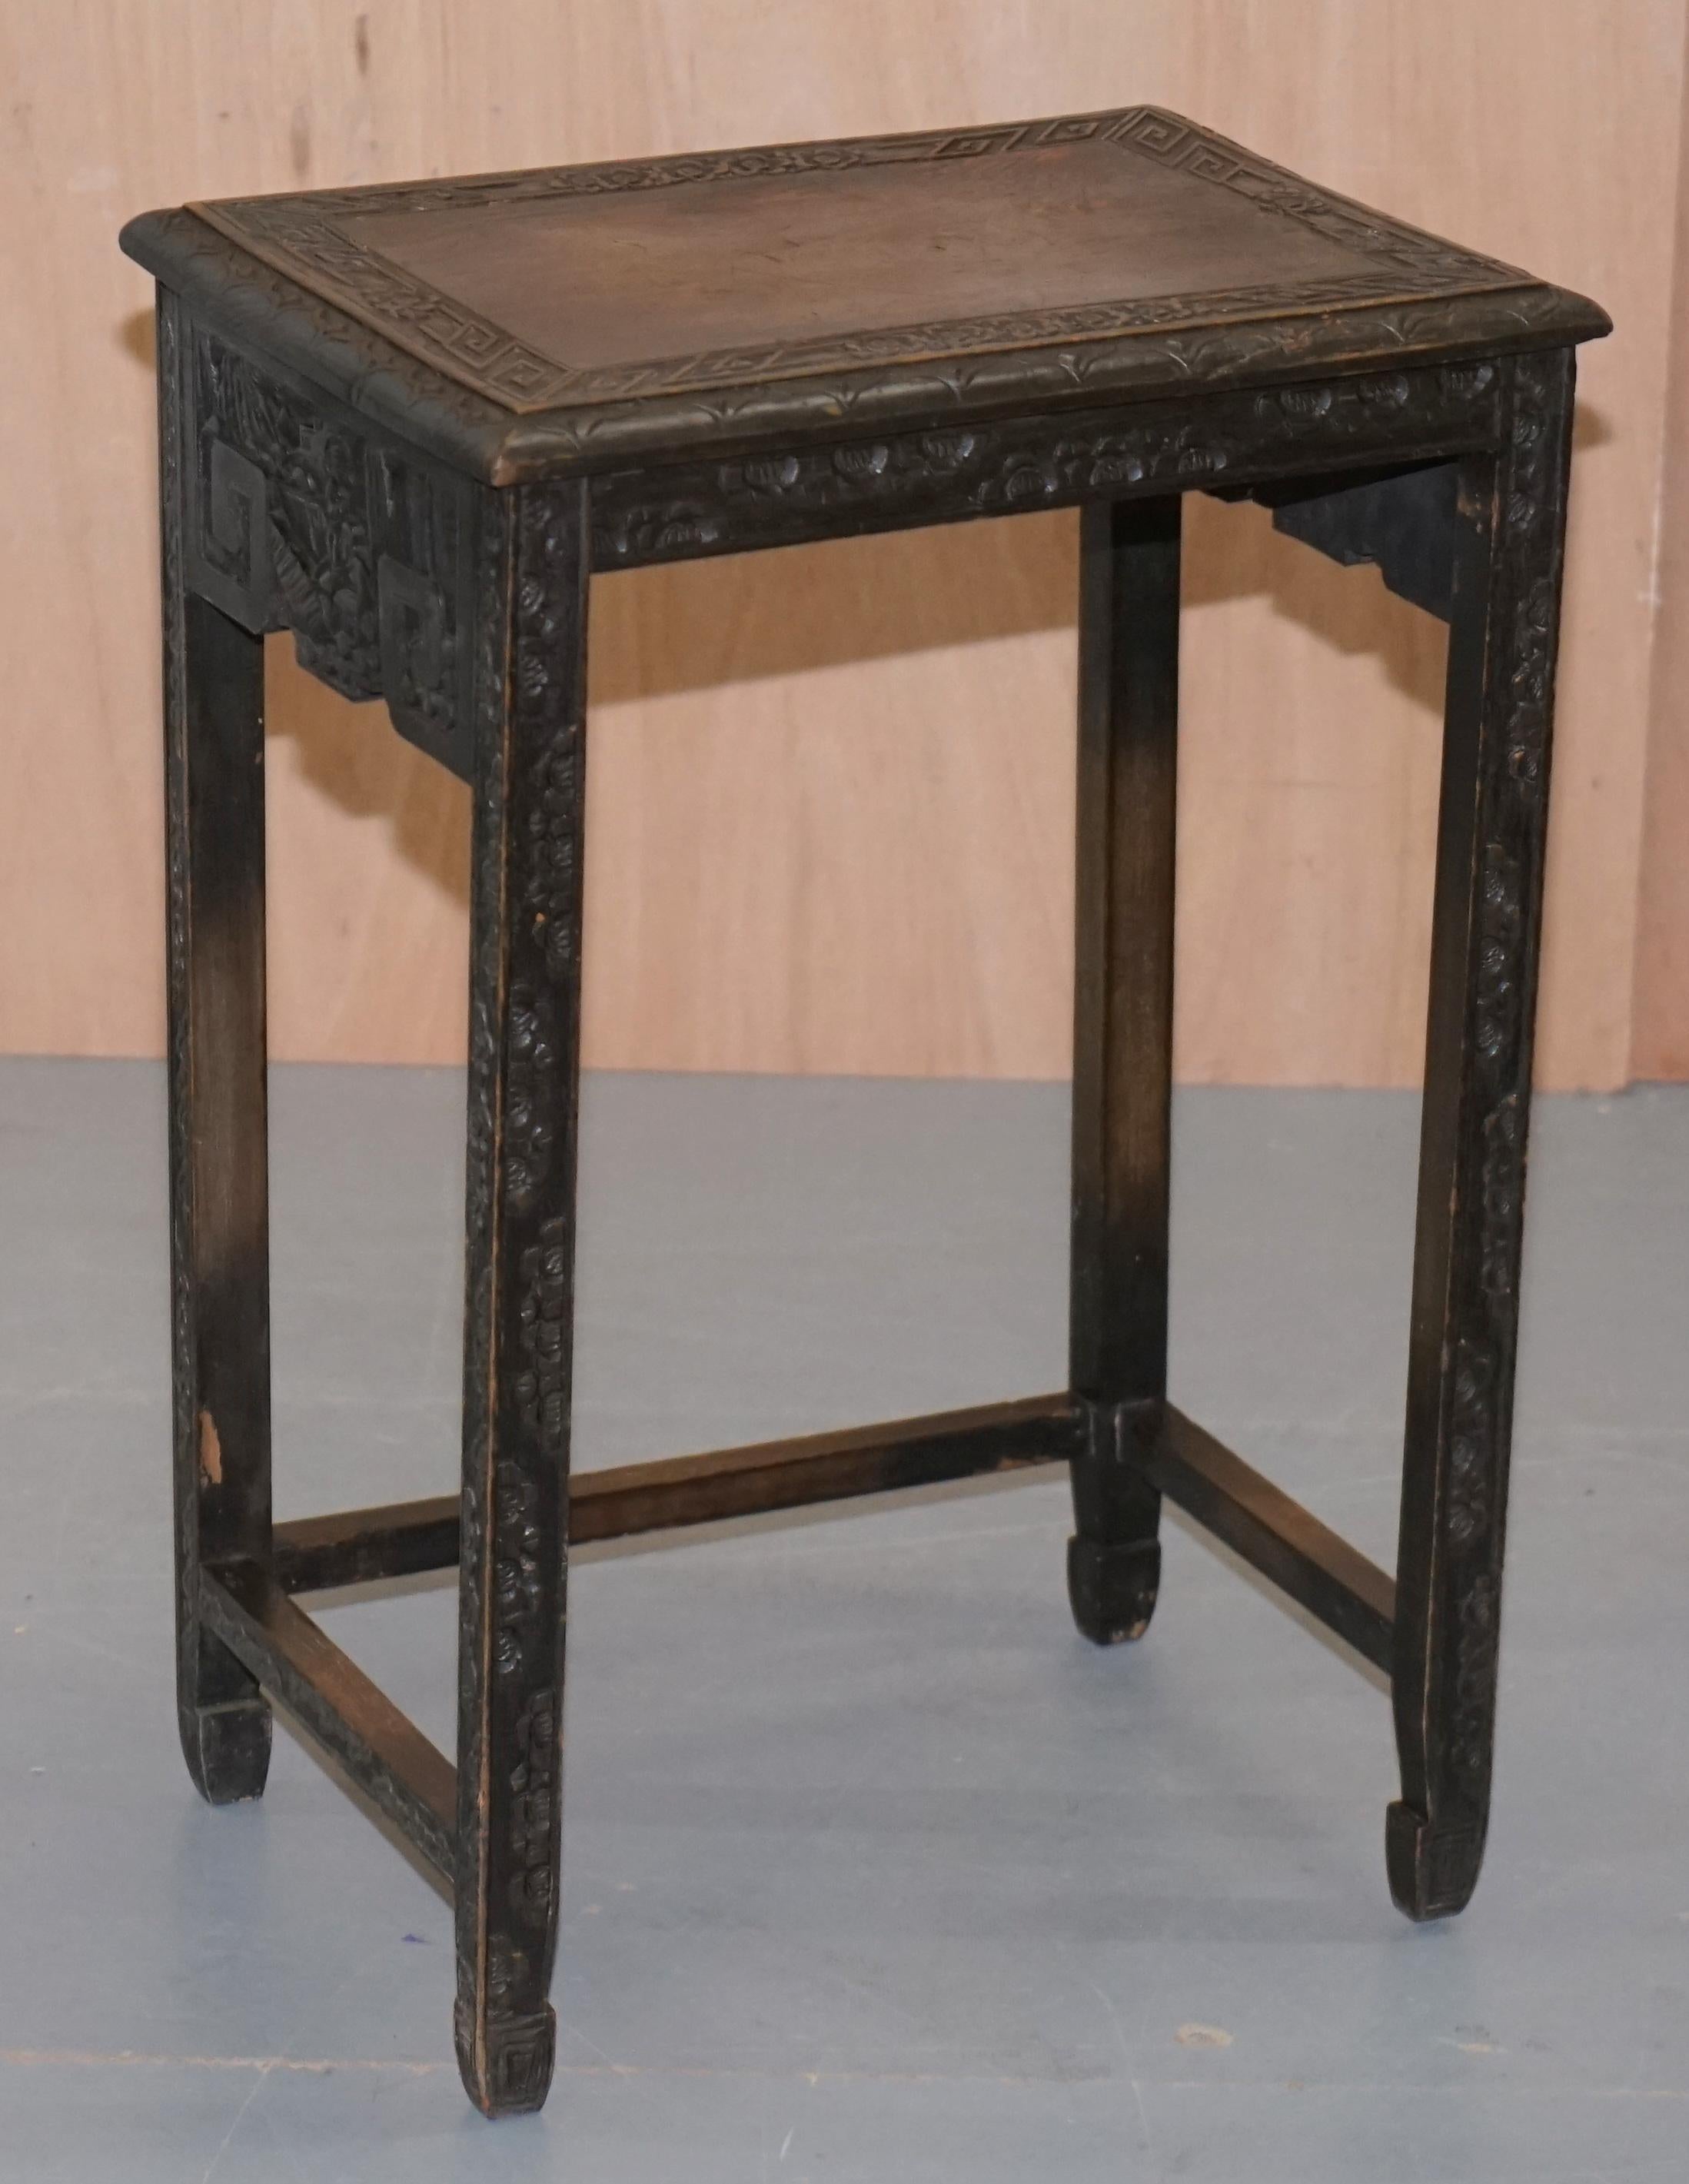 Early 20th Century Chinese Export circa 1900 Nest of Three Tables Heavily Carved All-Over Ebonized